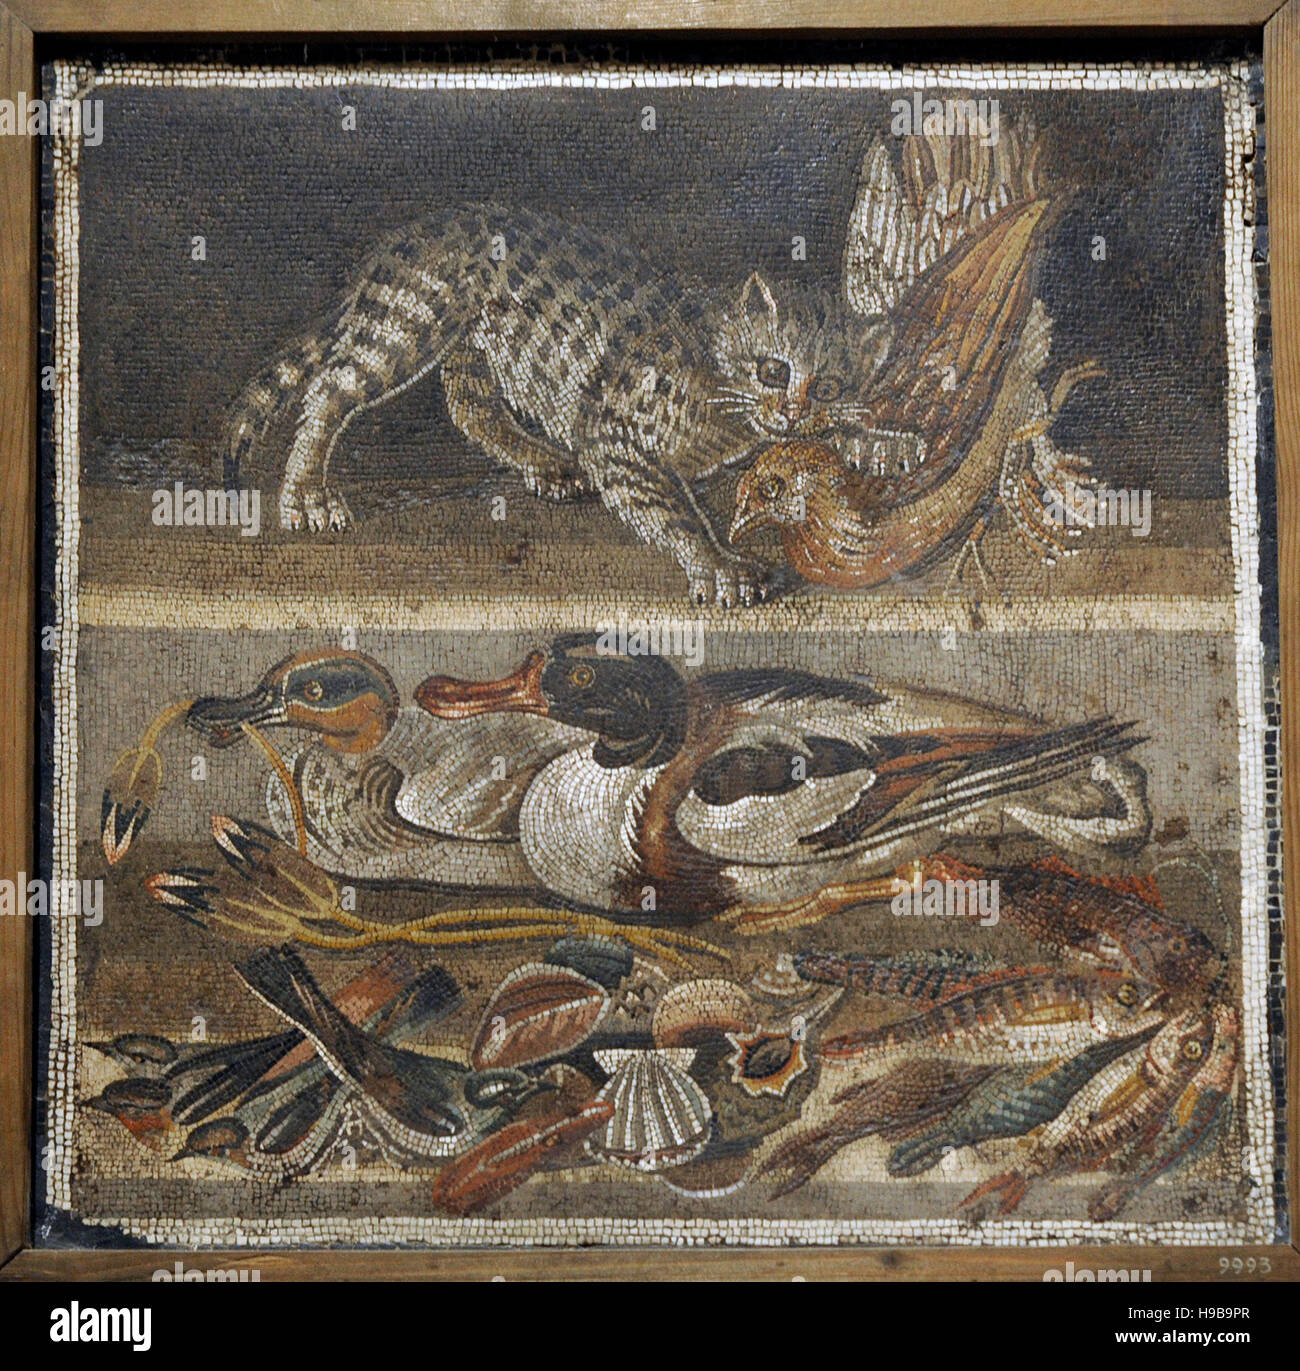 Roman mosaic. Cat with bird, ducks and sea life. Pompeii, House of the Faun (VI, 12, 2). 2nd century BC.National Archaeological Museum, Naples. Italy. Stock Photo